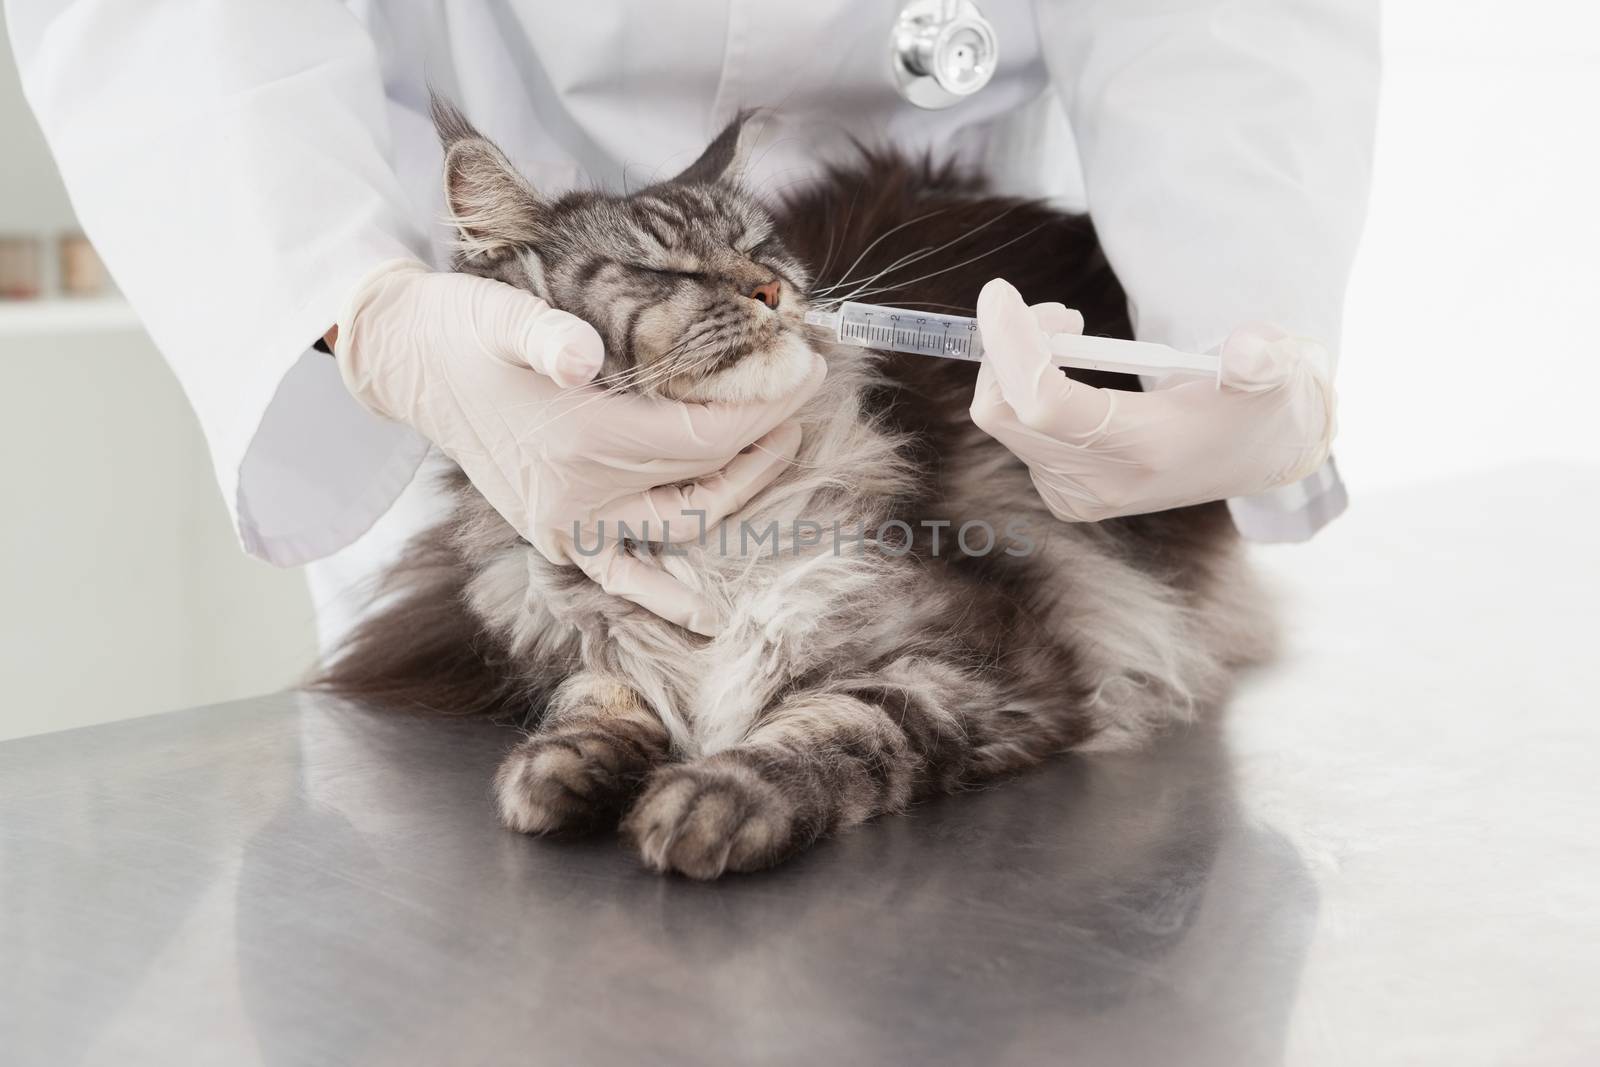 Vet doing injection at a cute grey cat by Wavebreakmedia